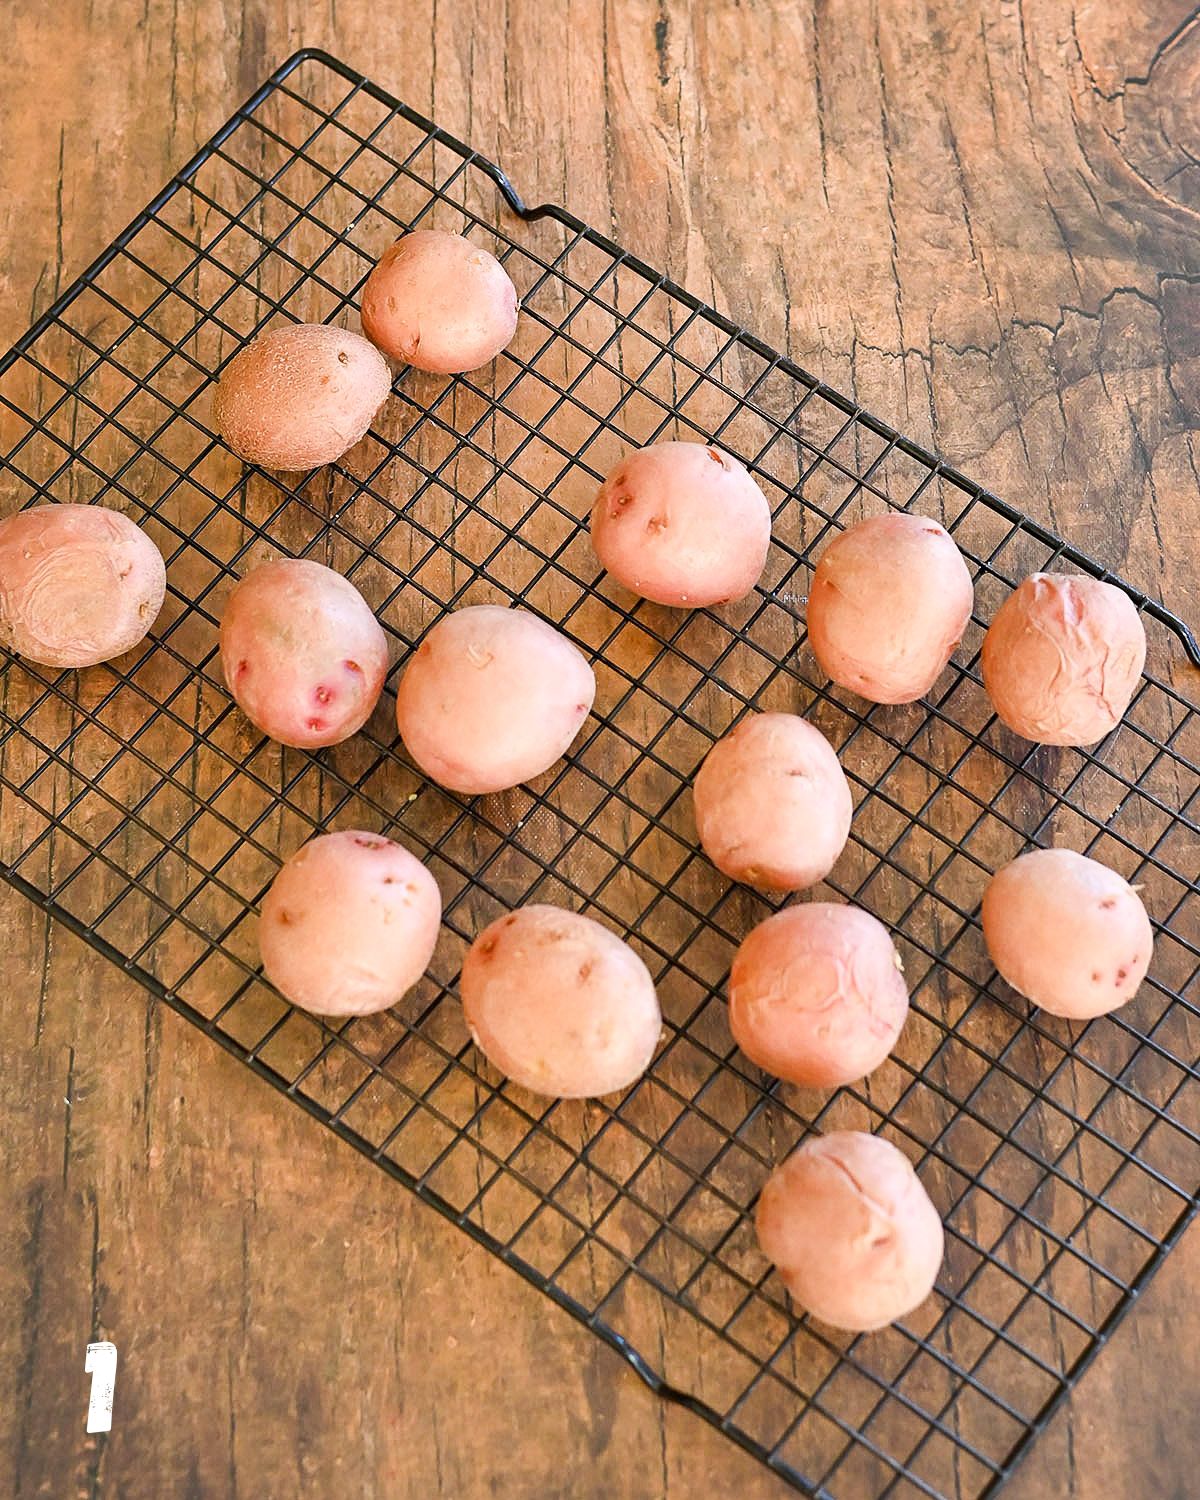 Red potatoes sitting on a black wire rack.